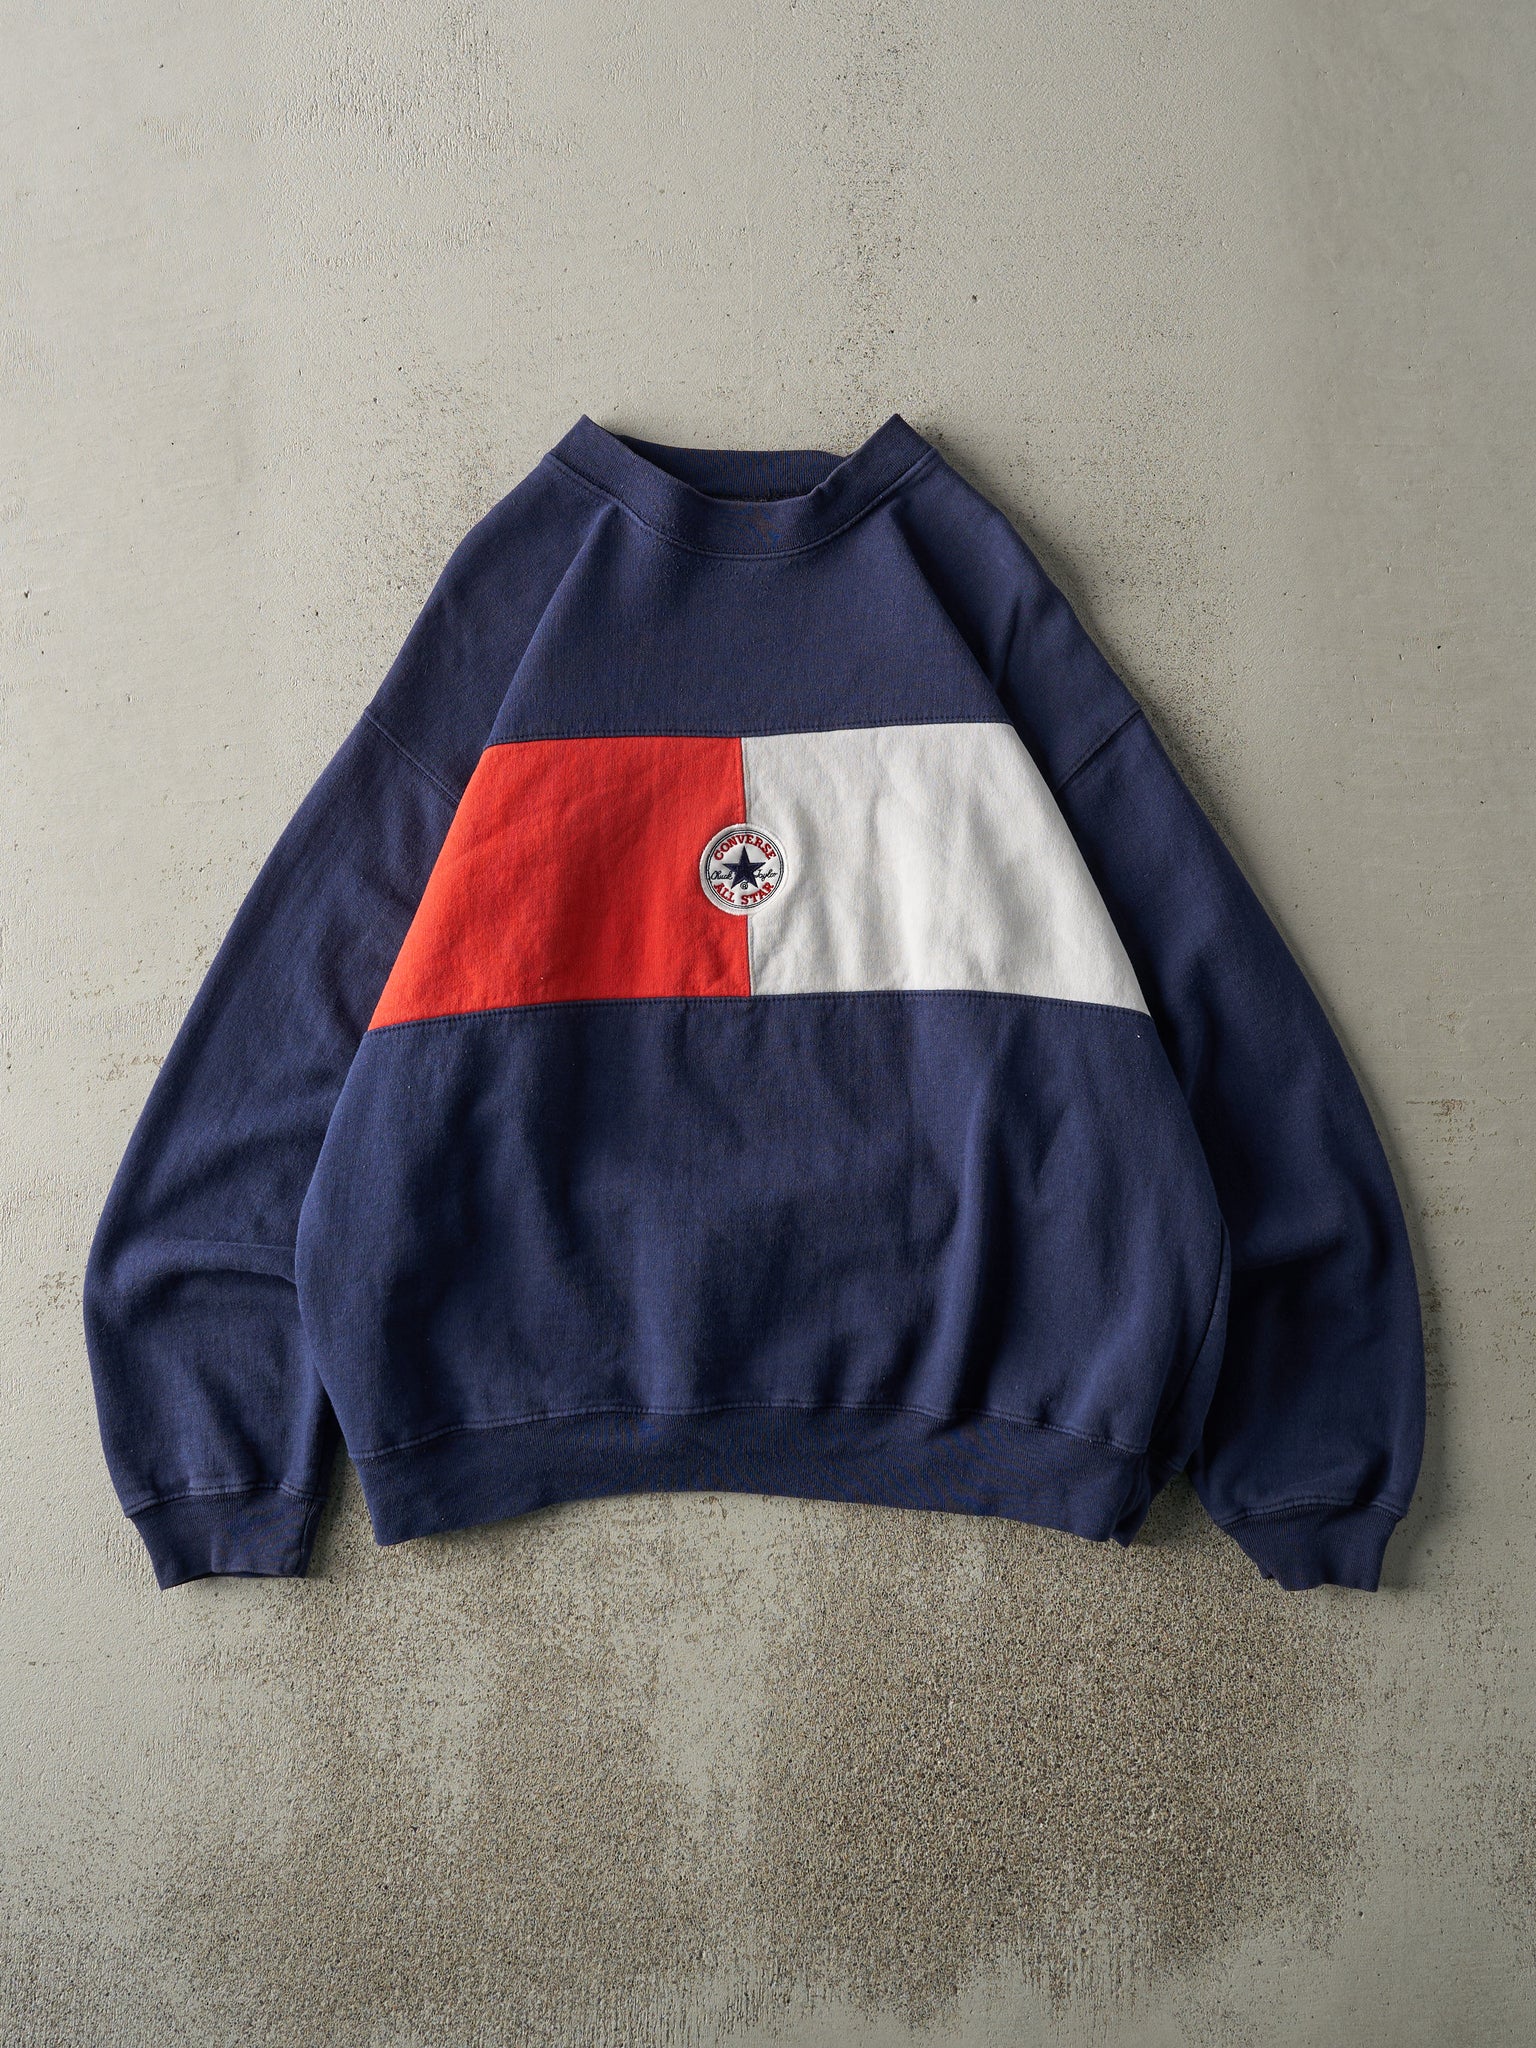 Vintage 90s Navy, Red & White Converse All Star Boxy Crewneck (L)